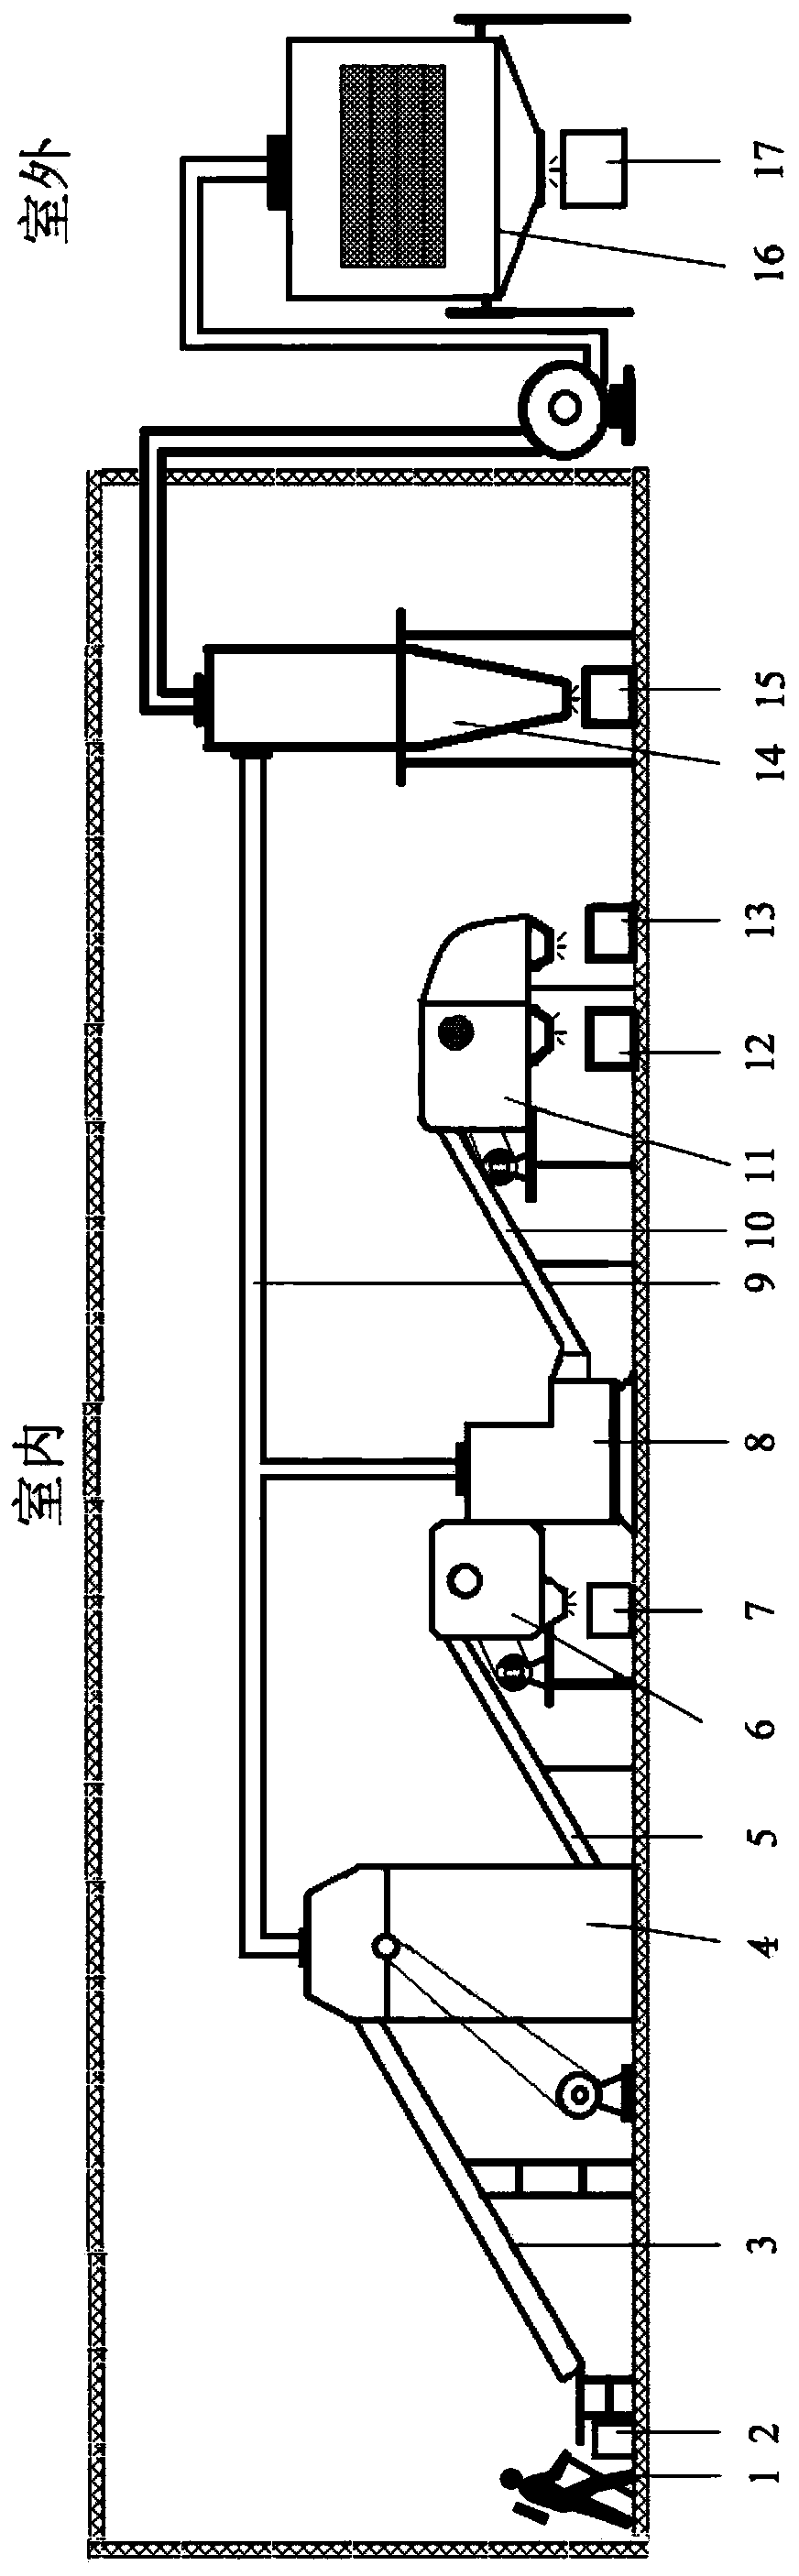 Method and device for recovering waste air circuit breaker